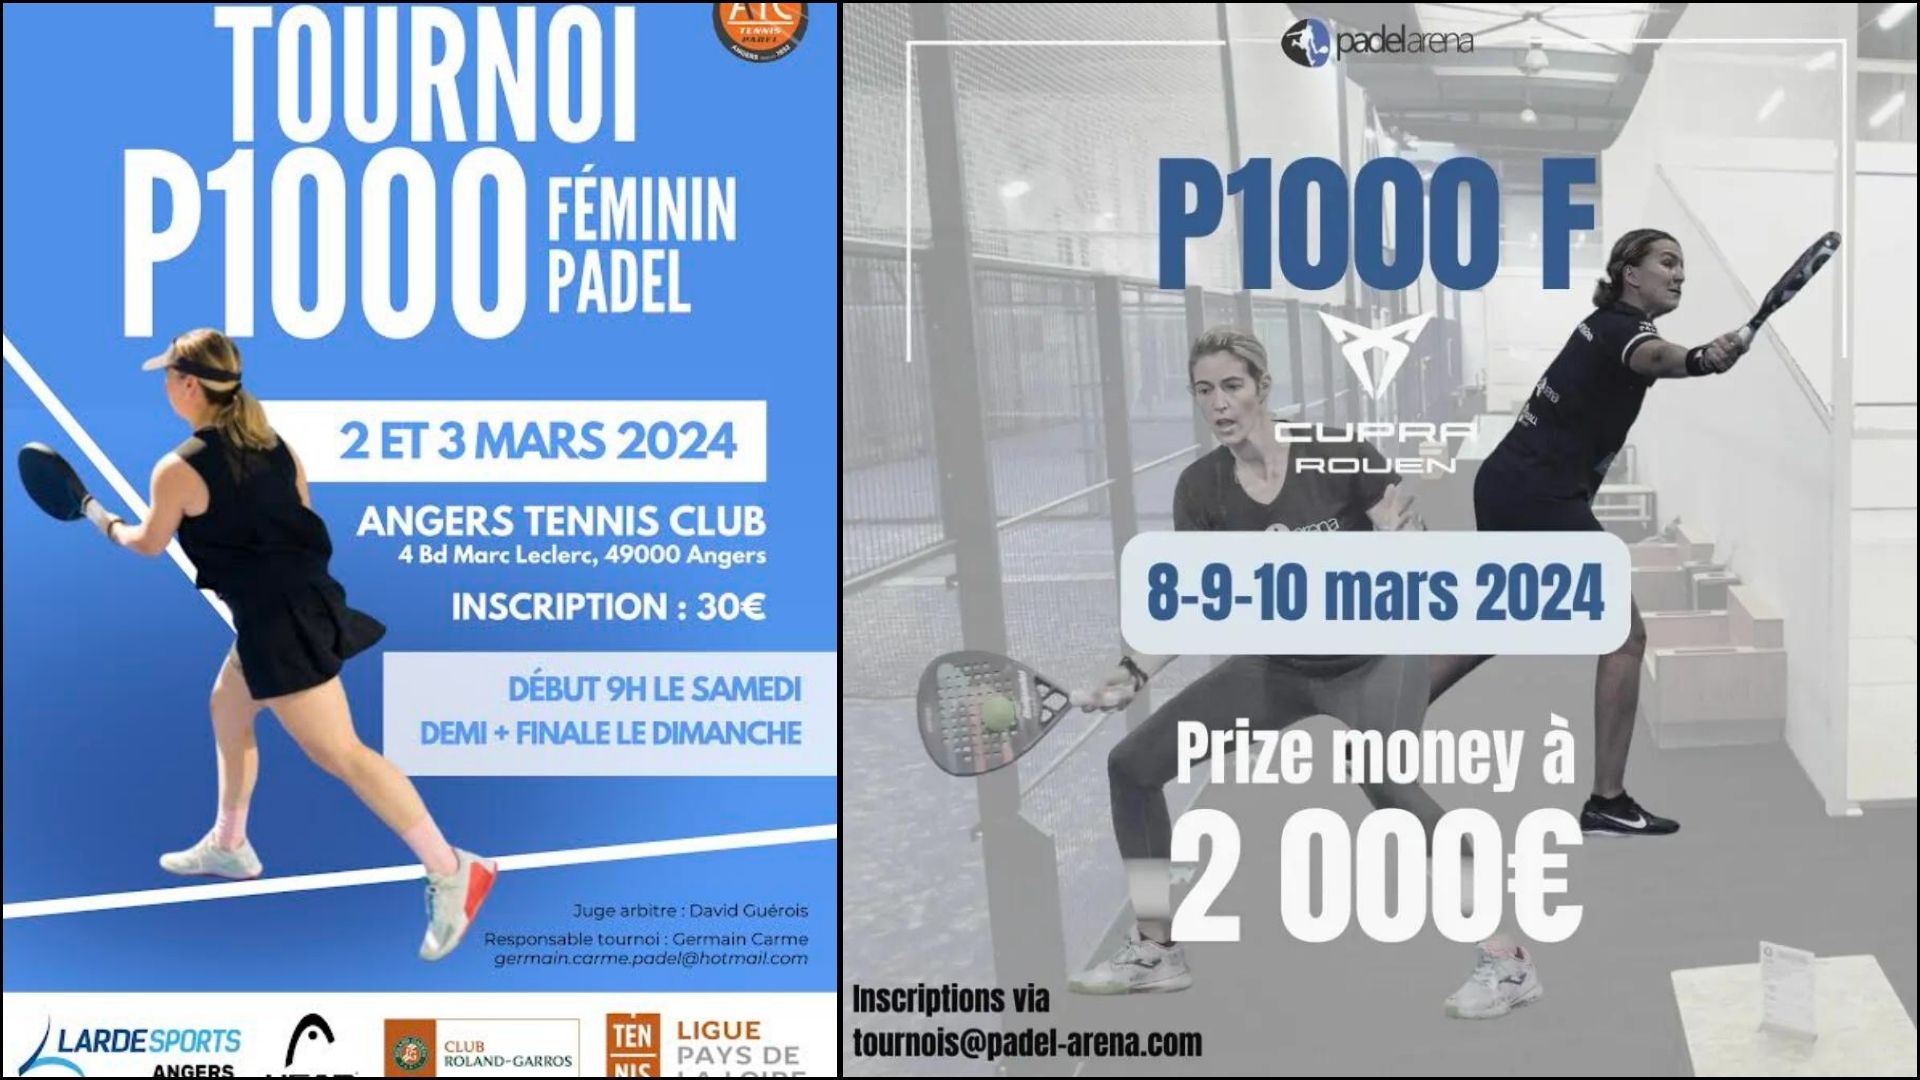 P1000 Angers affisch - Padel Arena